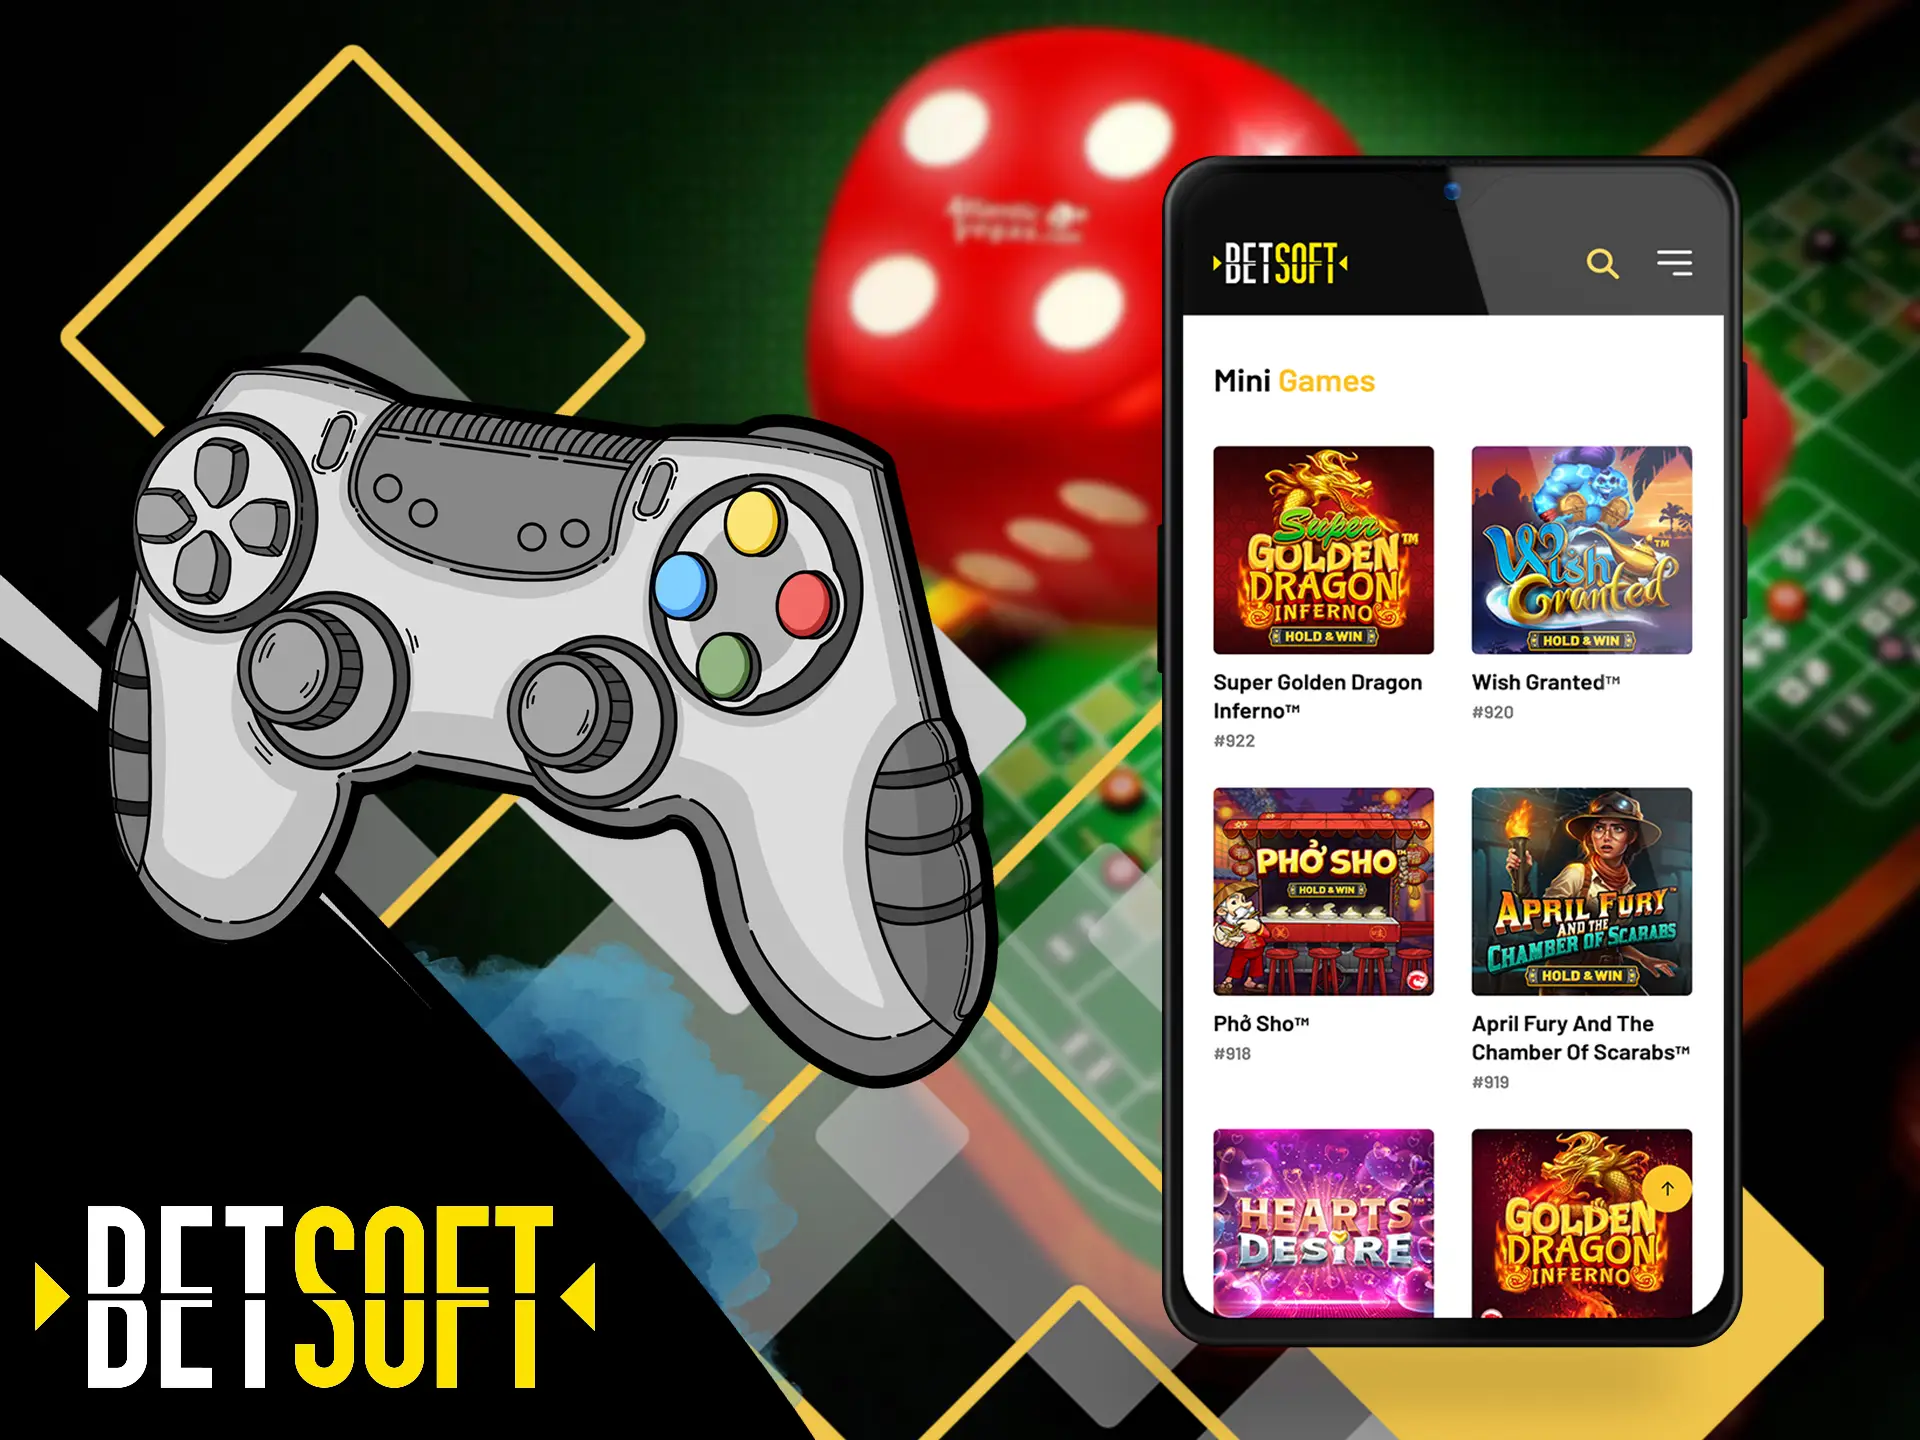 If you are tired of the classics, Betsoft has a modern kind of games allowing for a new gaming experience.